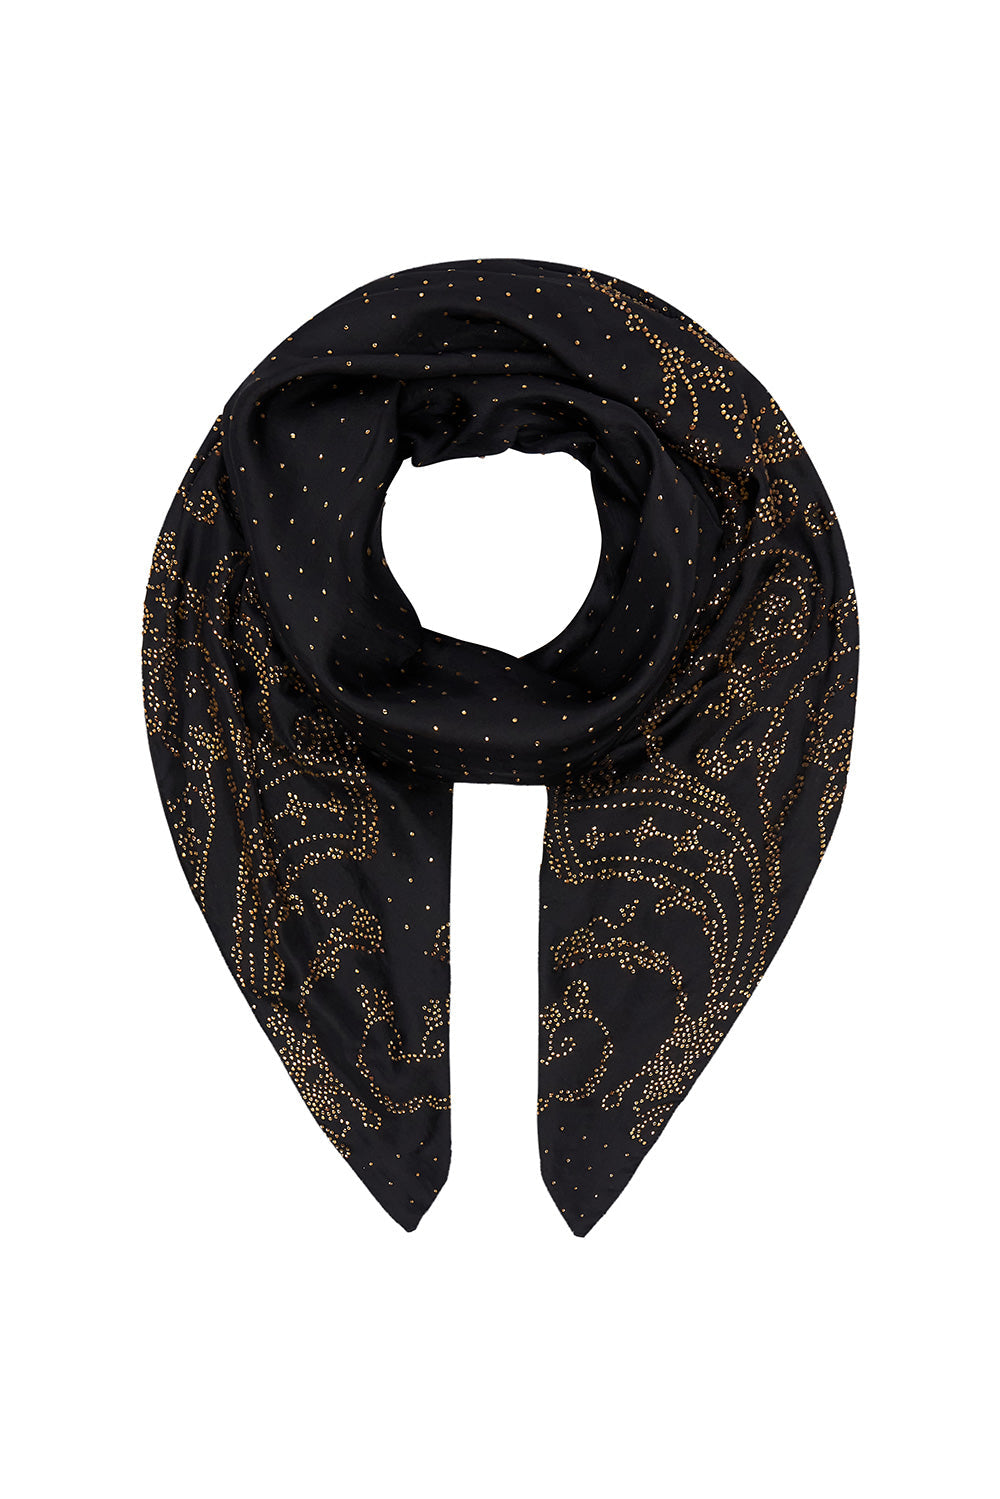 LARGE SQUARE SCARF LUXE BLACK